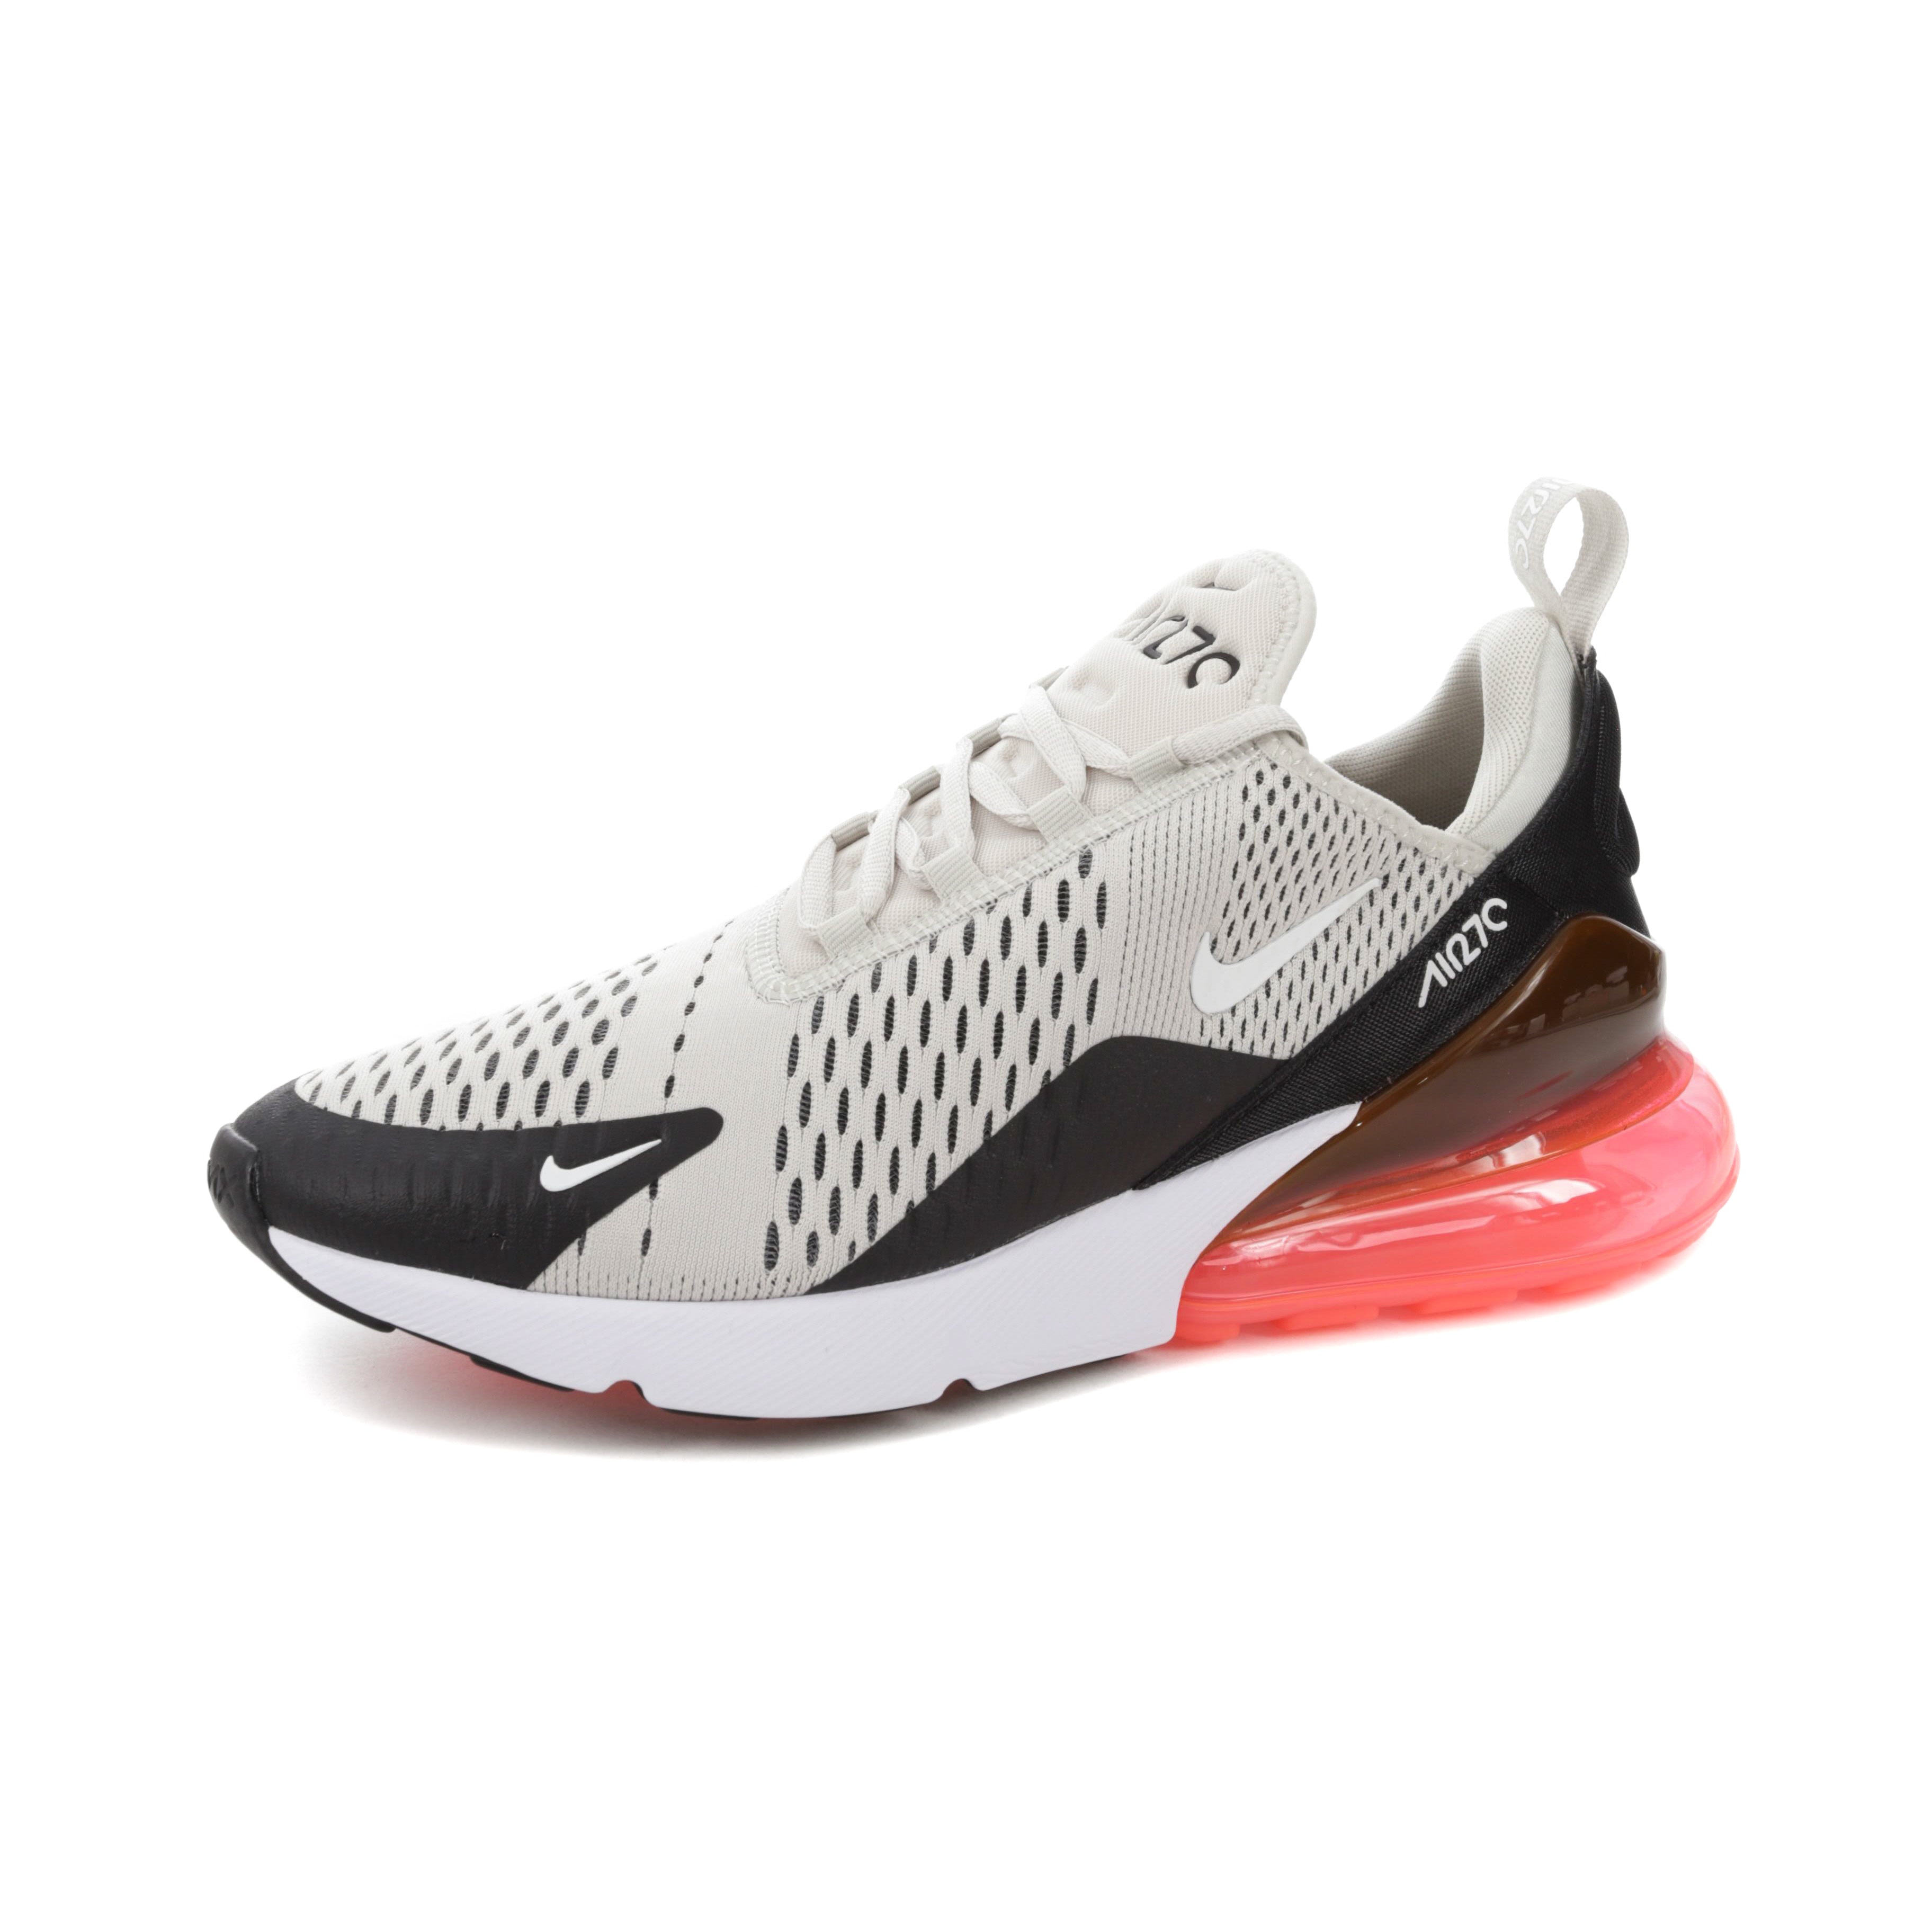 nike air max 270 black pink and white 